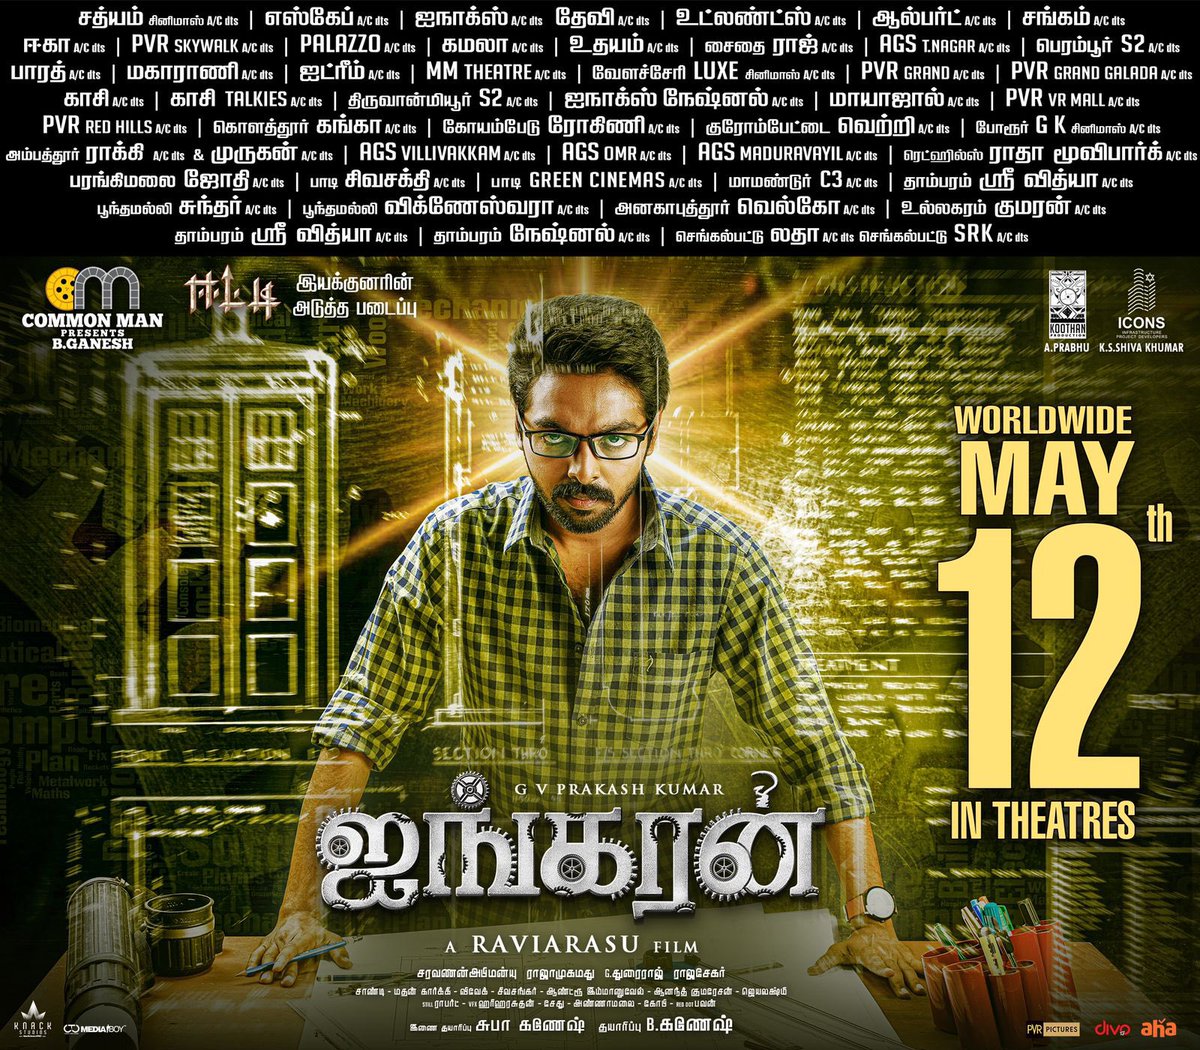 #ayngaran releases in theatres on MAY 12th . Hearing a lot of positive reviews . Best of luck @gvprakash god bless.